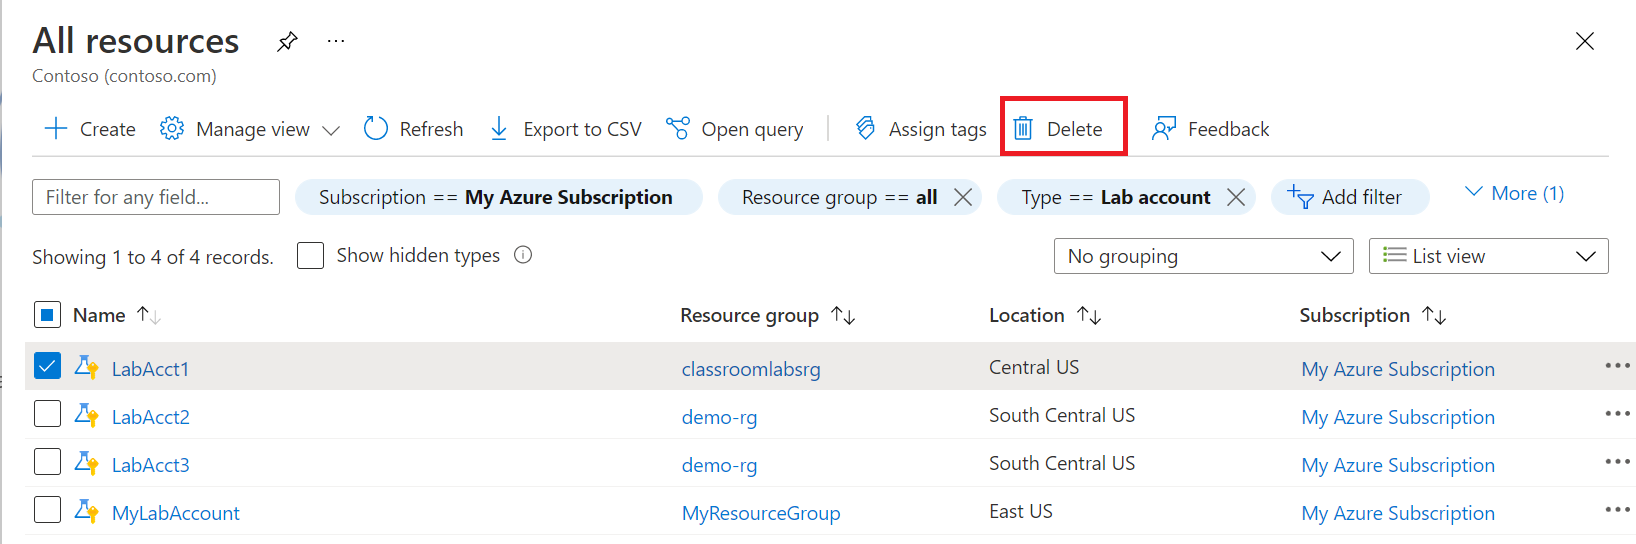 Screenshot that shows All resources page in the Azure portal with resources filtered to list lab accounts.  The delete button on the toolbar is highlighted.